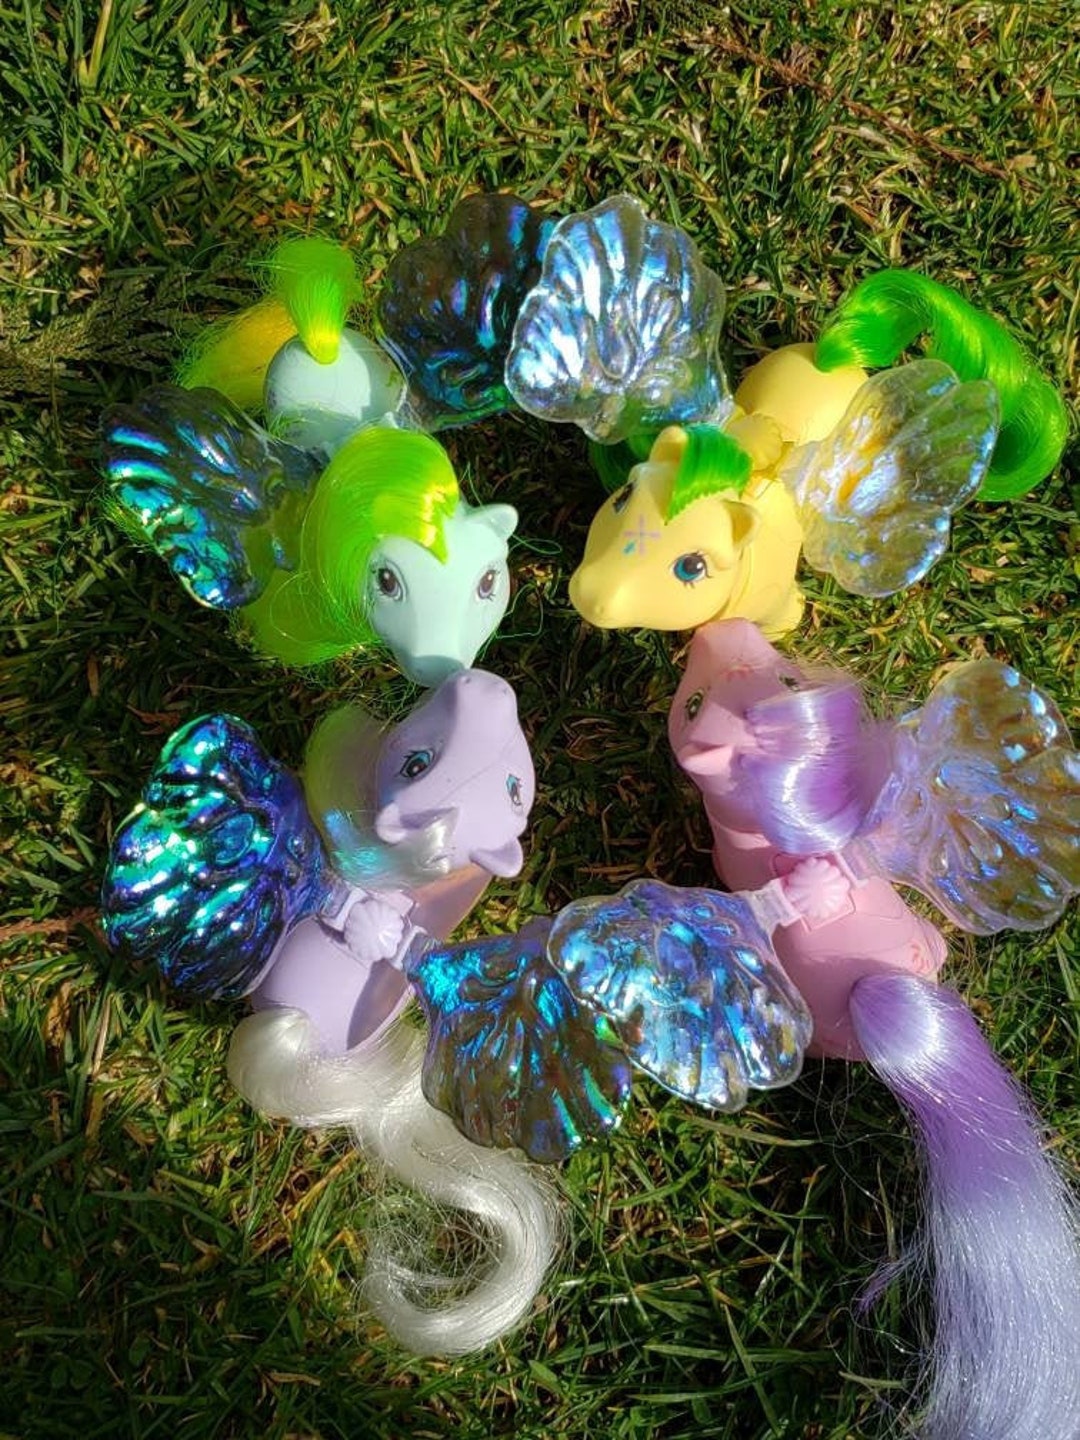 Replacement Pony Hair Ribbons for G1 My Little Ponies - Green Shades